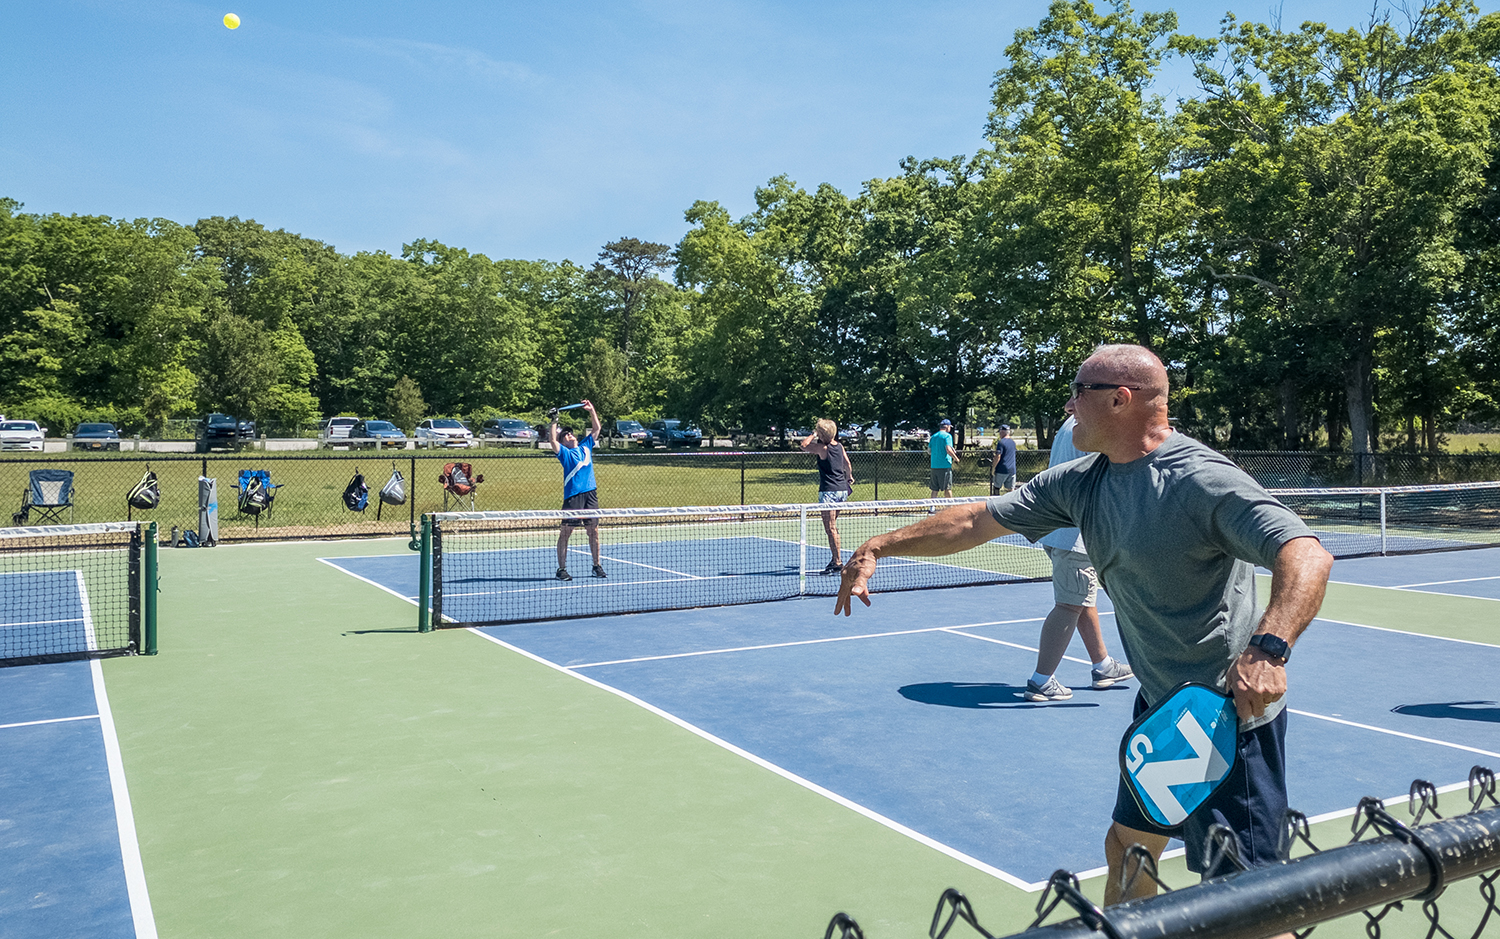 New pickleball courts repaved tennis and basketball courts unveiled at